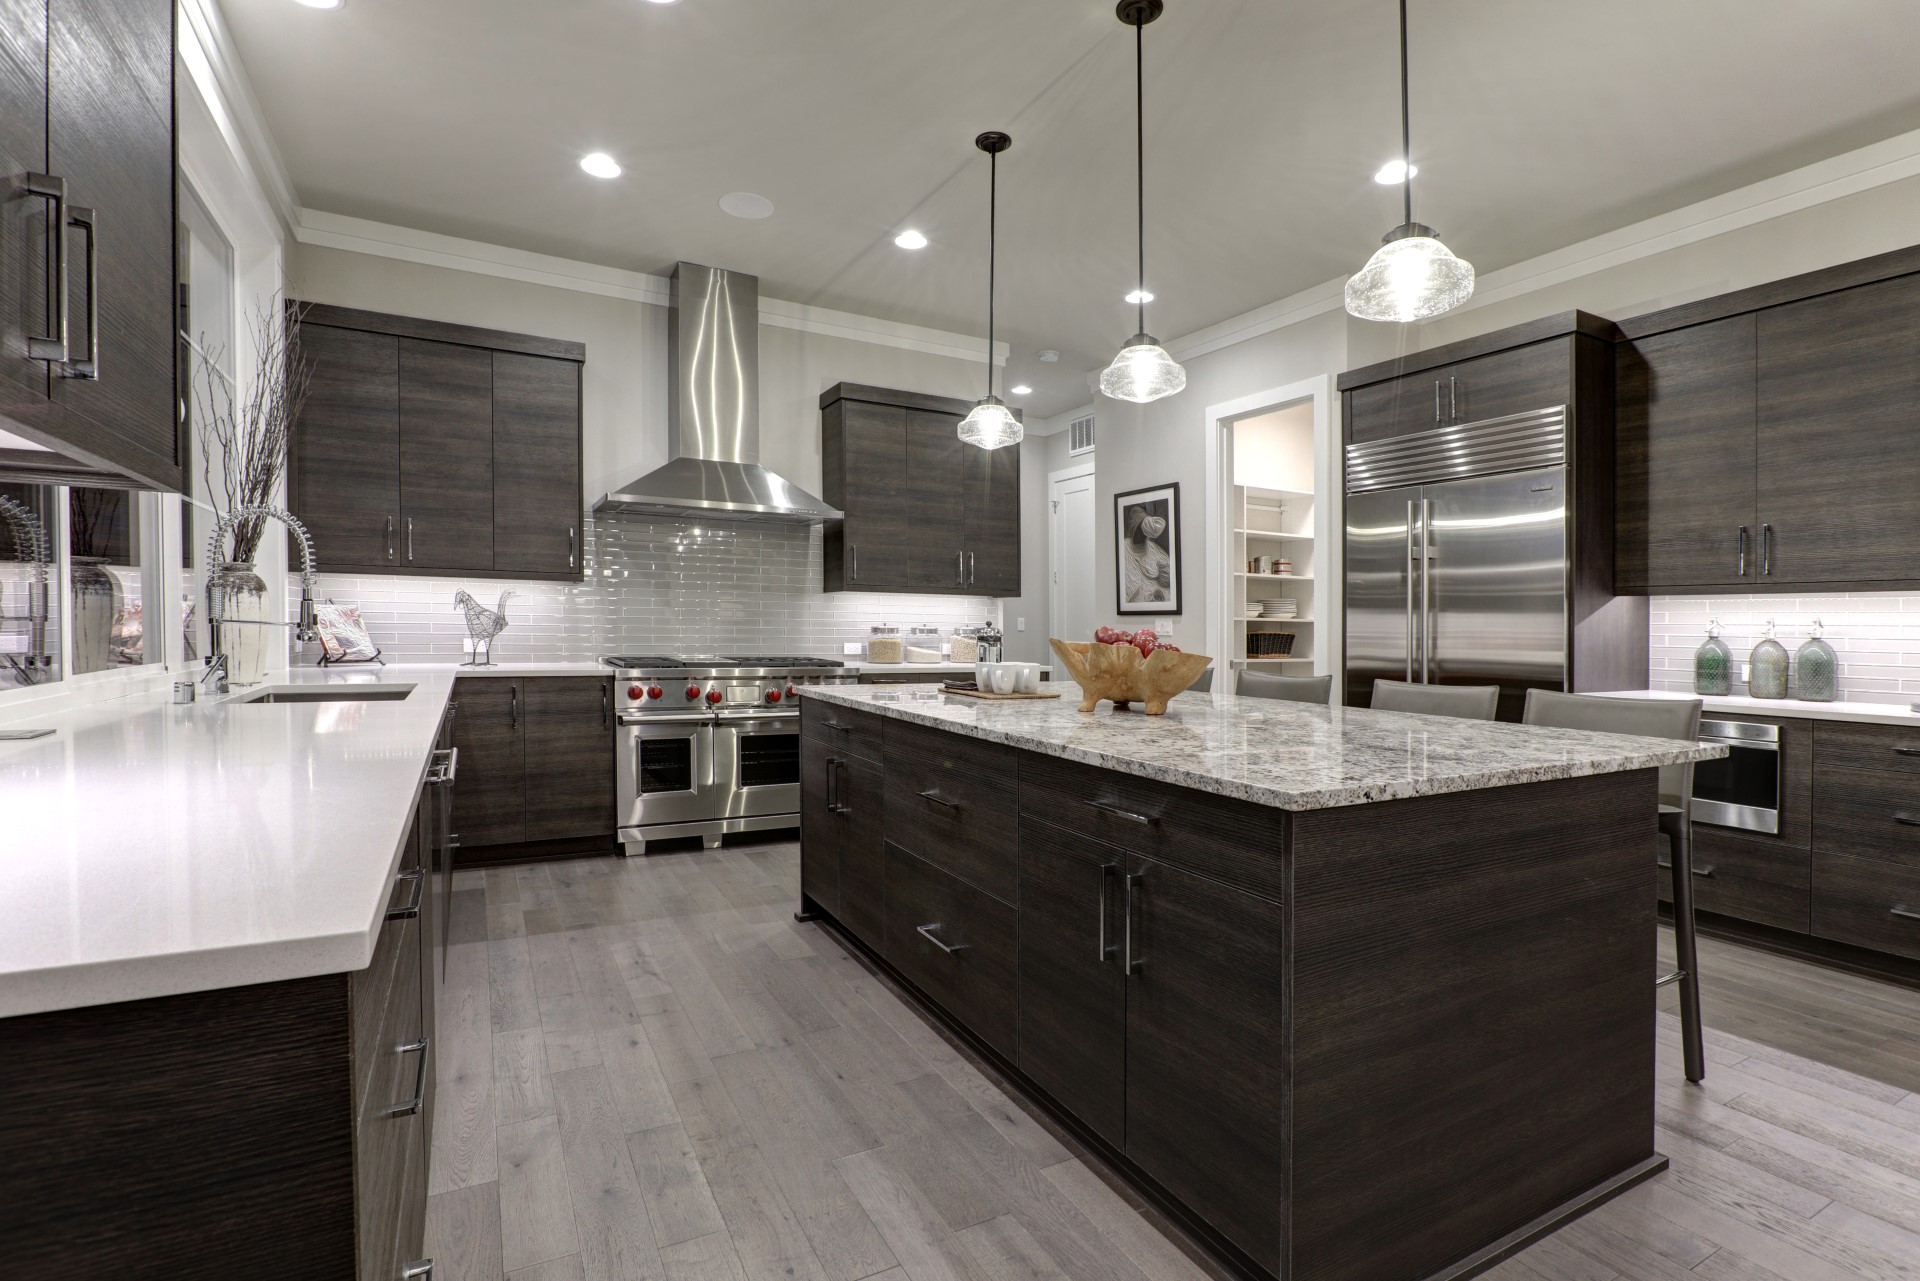 I kitchen with dark cabinets helps bring forth the beauty of your light flooring. A kitchen needs contrast and physique to achieve harmony in this modern style. When you mix wood, stone, and the bright sheen of stainless steel, it helps achieve the diversity that makes this style pop!